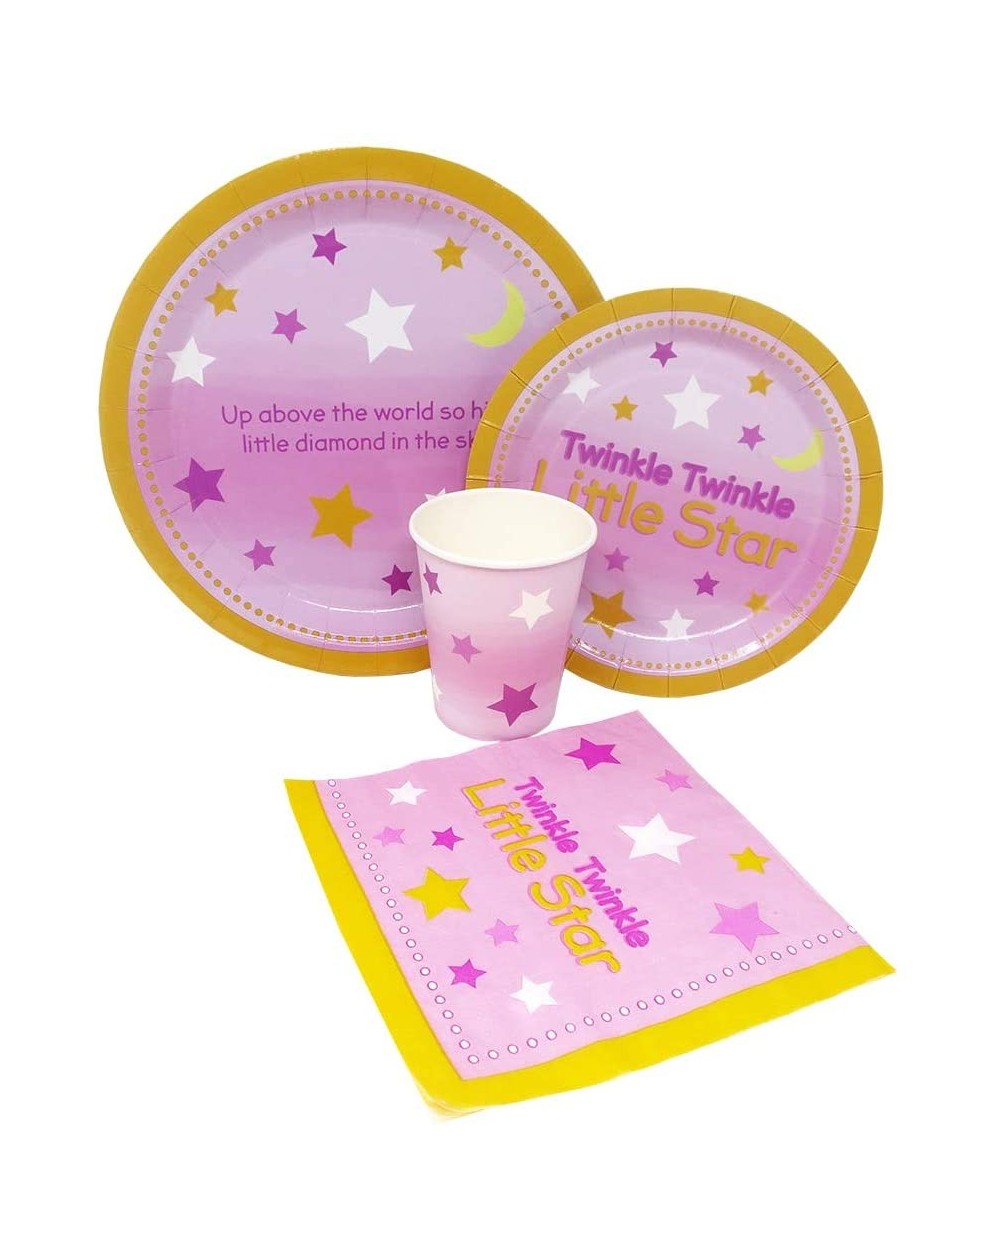 Party Packs Twinkle Twinkle Girl Party Supplies Packs (65+ Pieces for 16 Guests!)- Baby Shower Supplies- Birthday- Twinkle Tw...